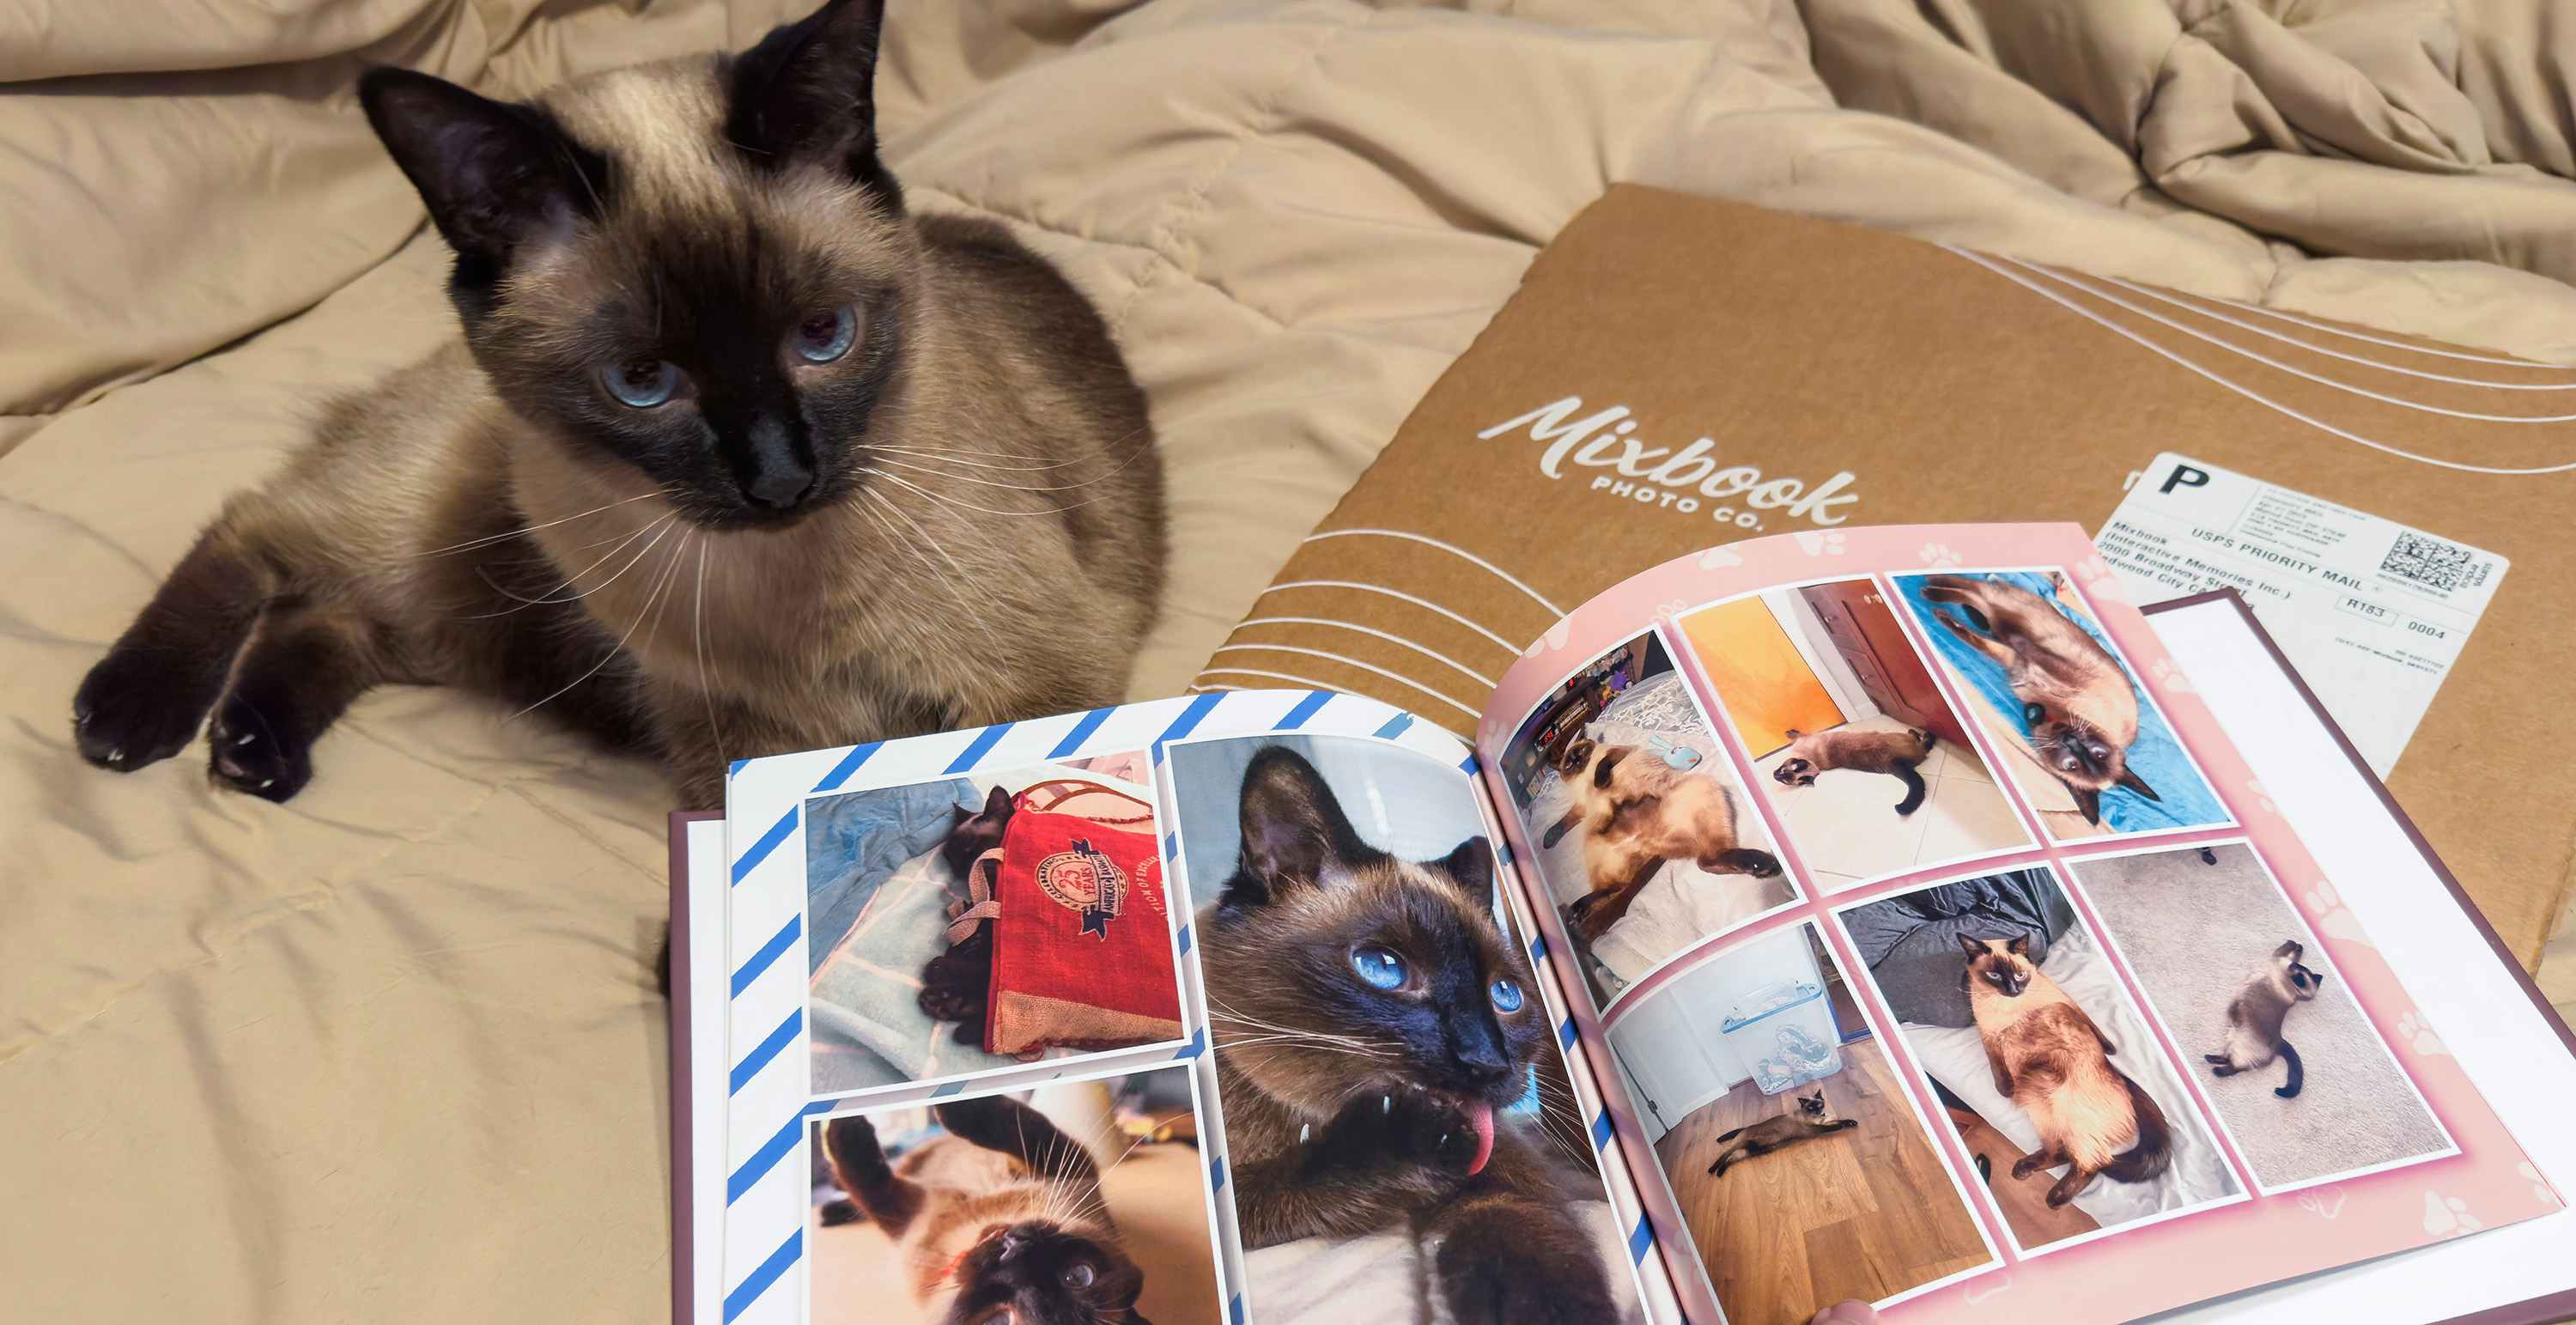 A cat laying next to a Mixbook pet photo book open, showing photos of the cat